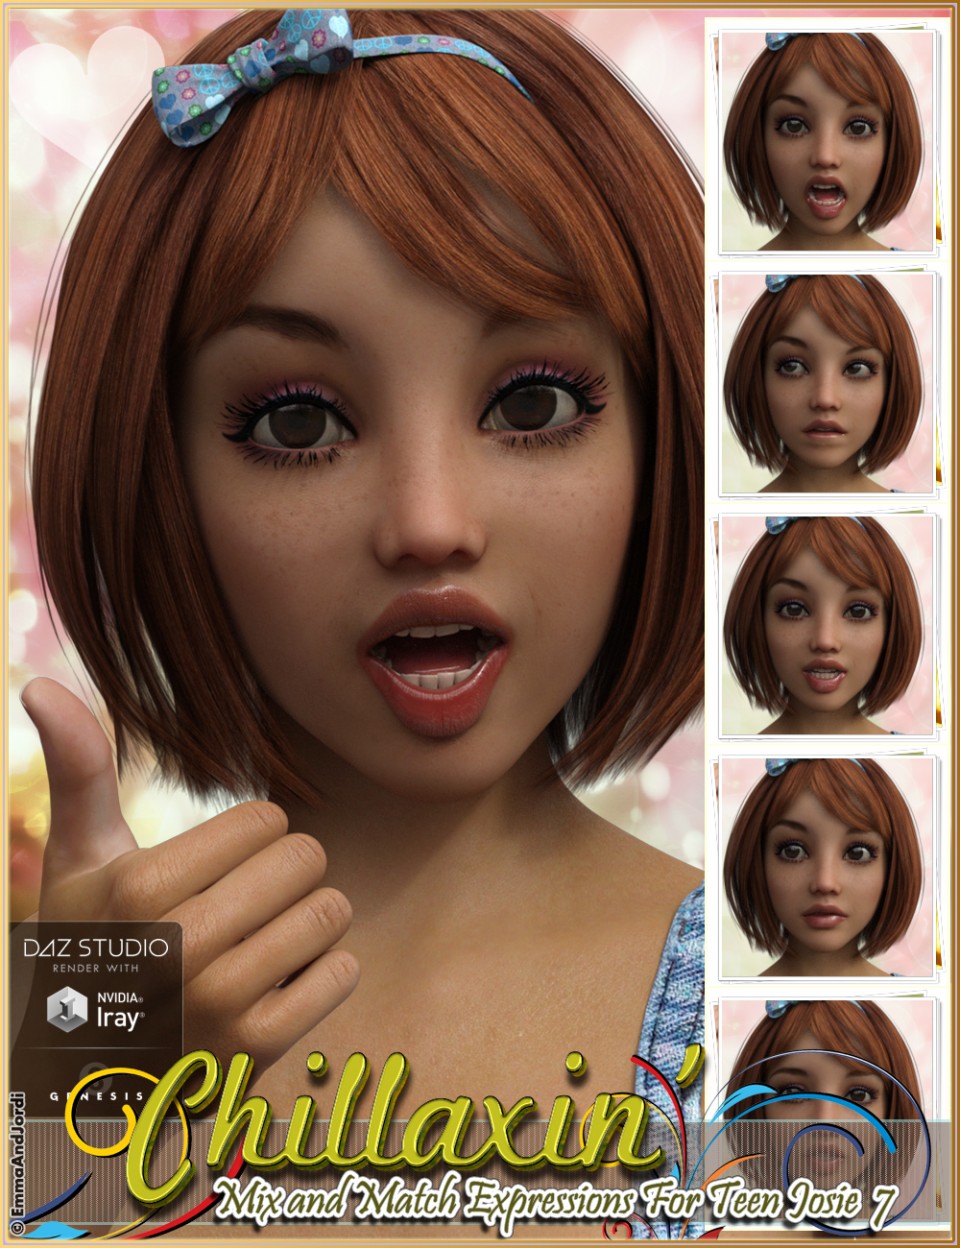 Chillaxin’ Mix and Match Expressions for Teen Josie 7_DAZ3D下载站